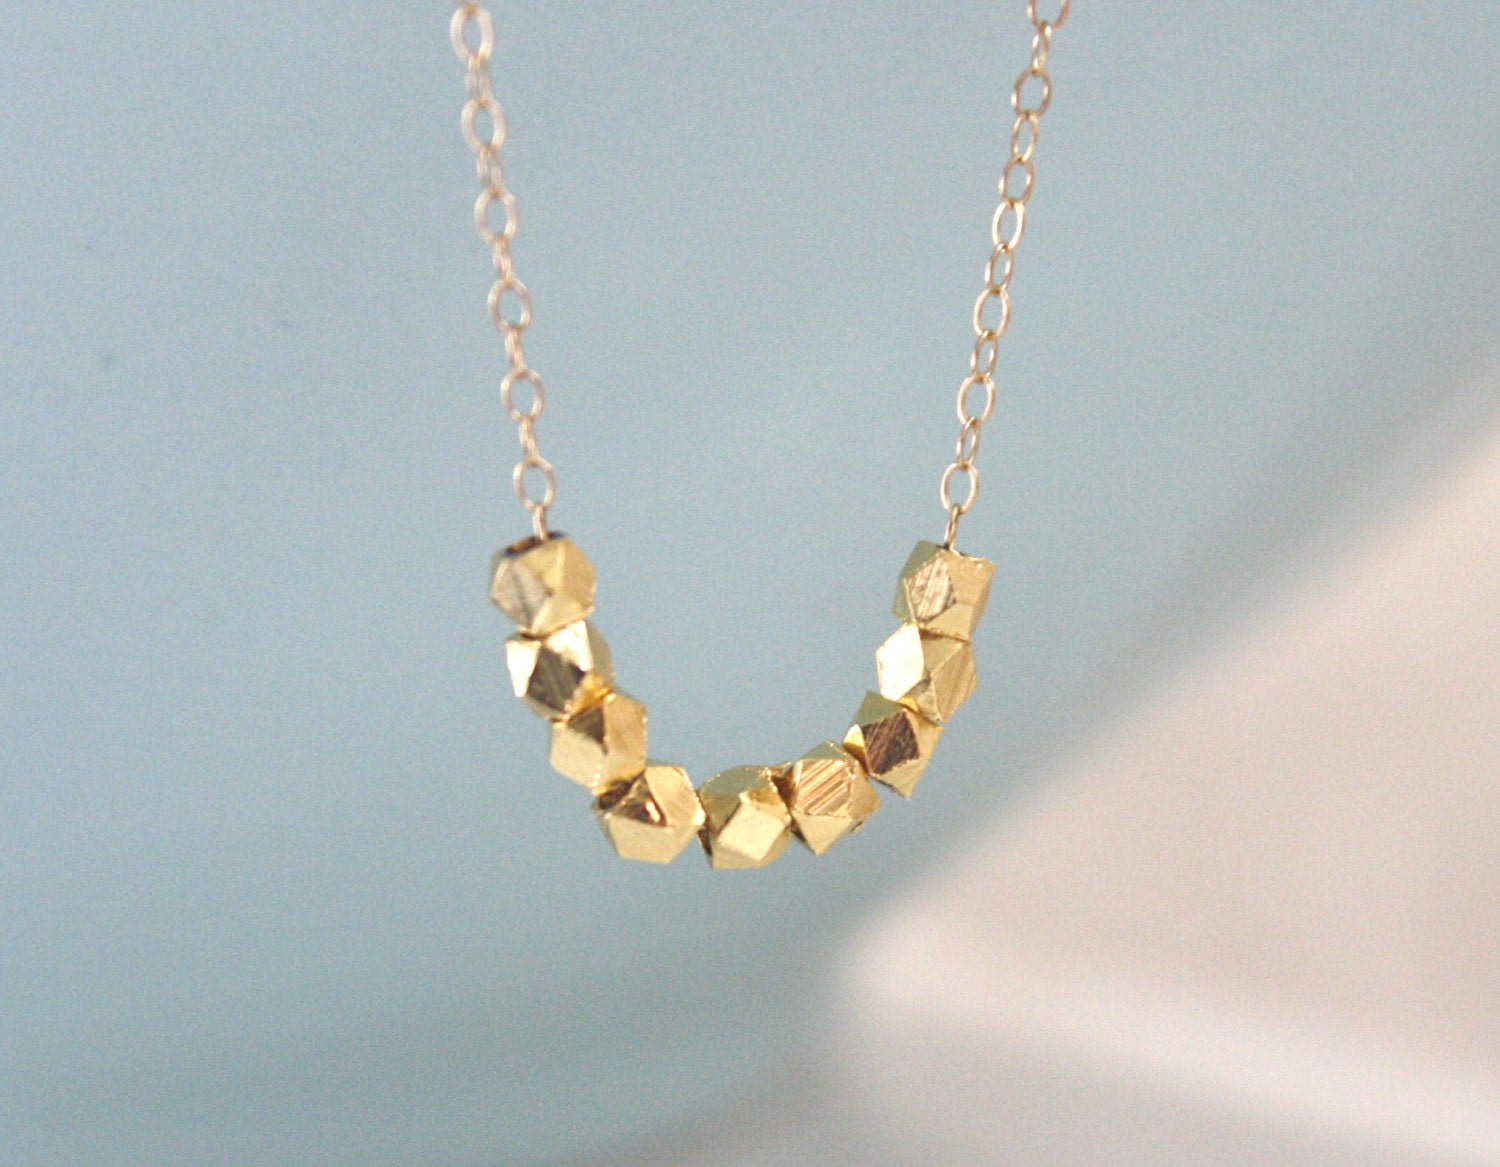 Gold Necklace, Dainty Gold Necklace, Gold Nugget Necklace, Bridesmaid Necklace, Birthday Gift, Gifts for Her, Best Friend, Best Seller